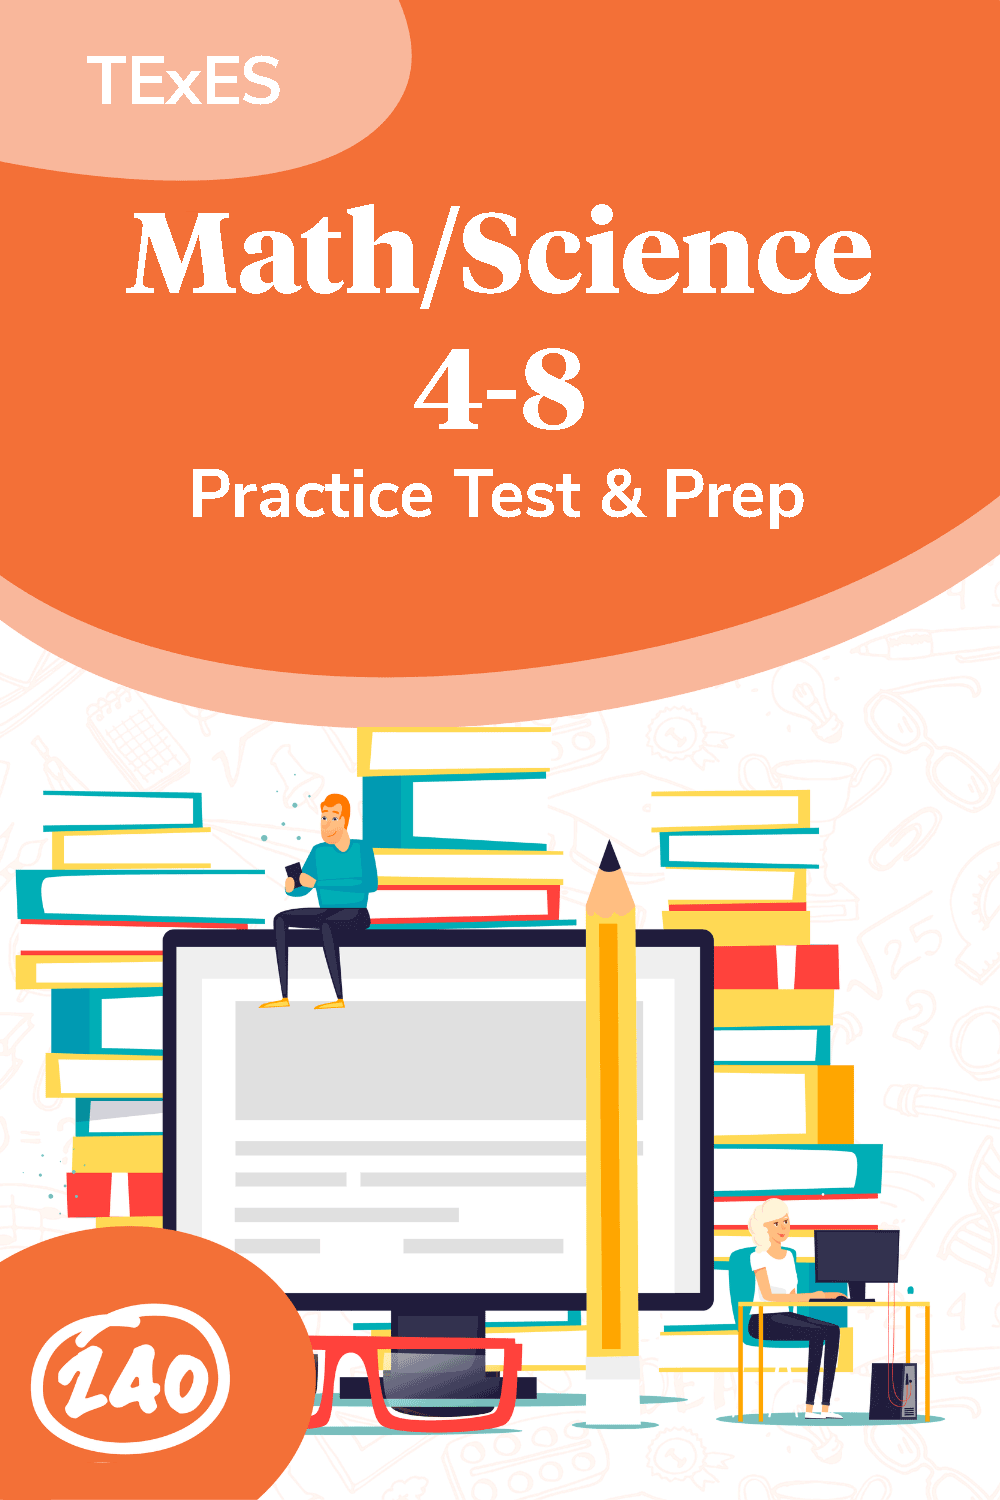 TExES Math/Science 4-8